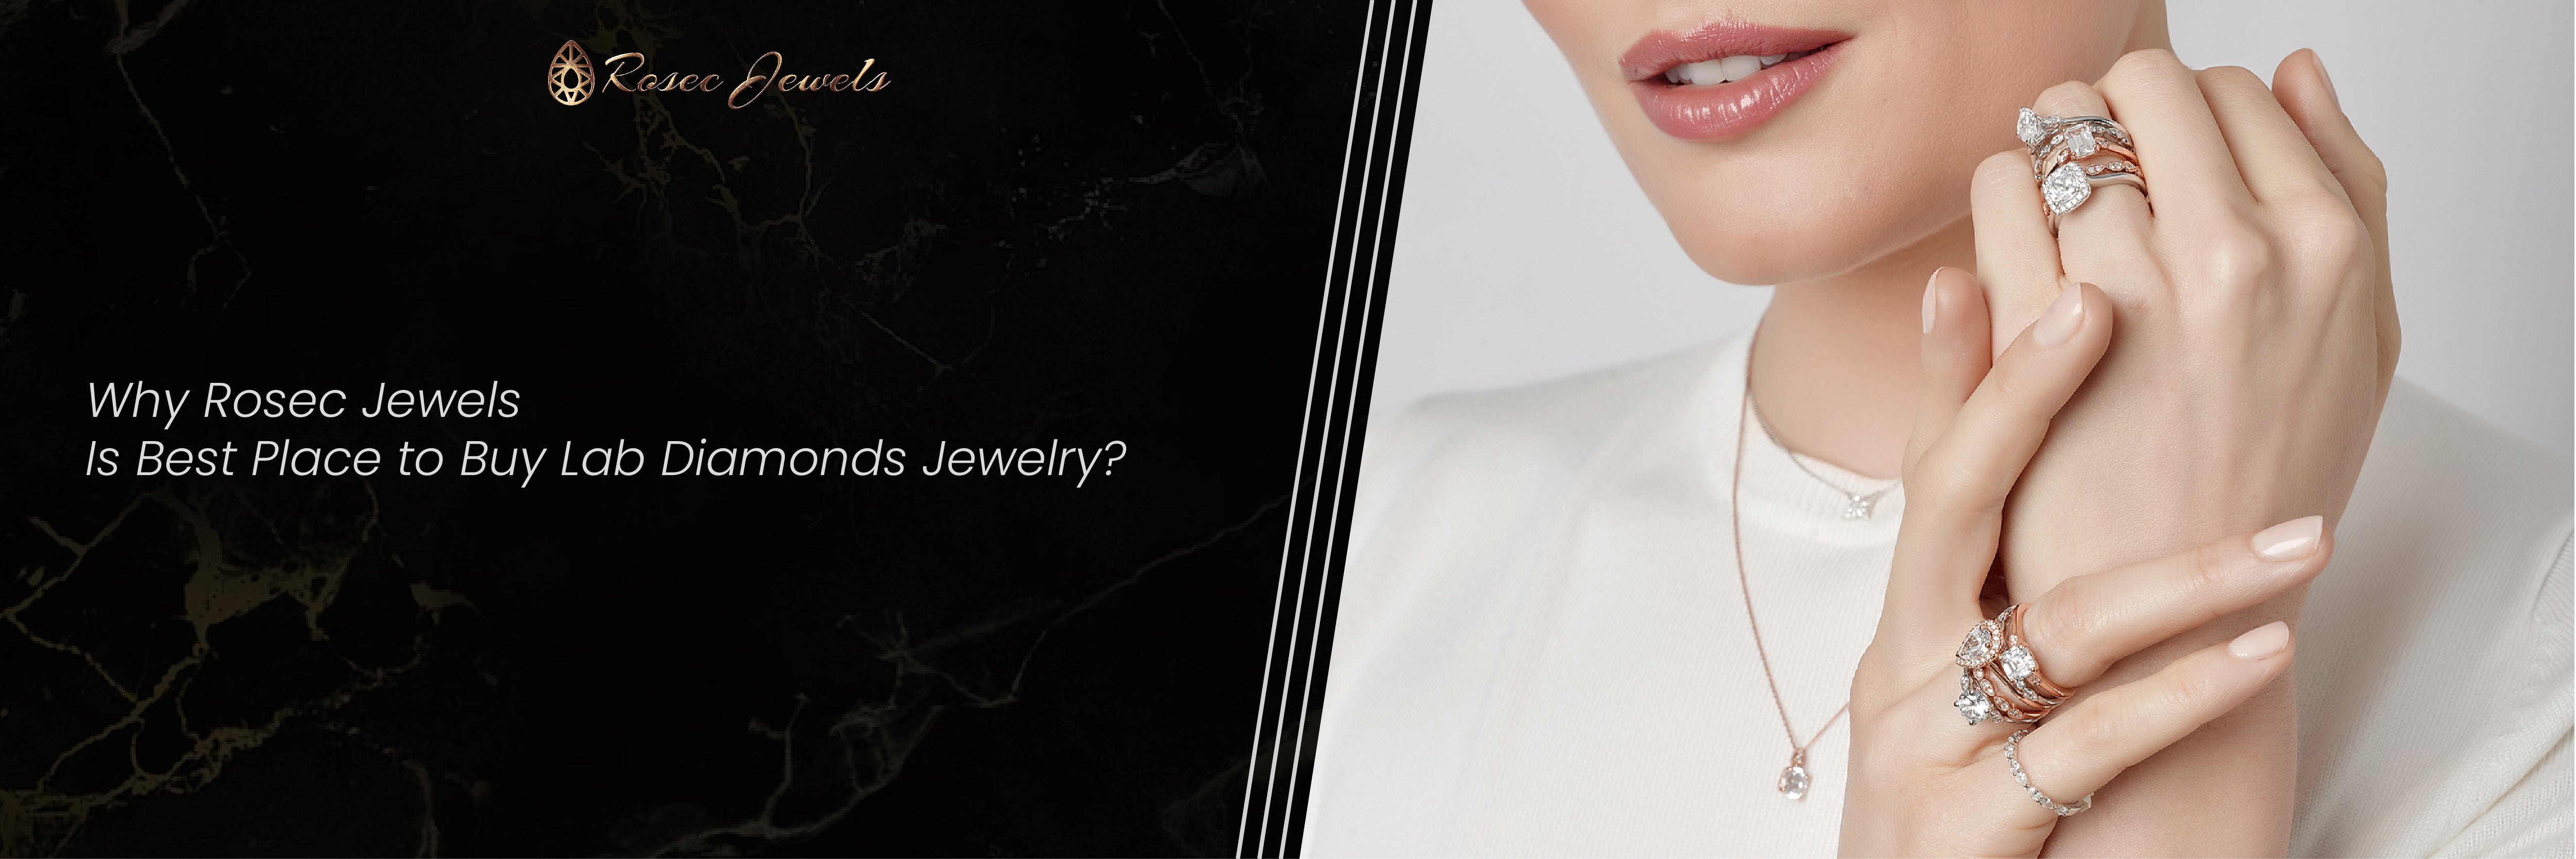 Why Rosec Jewels Is Best Place to Buy Lab Diamonds Jewelry?